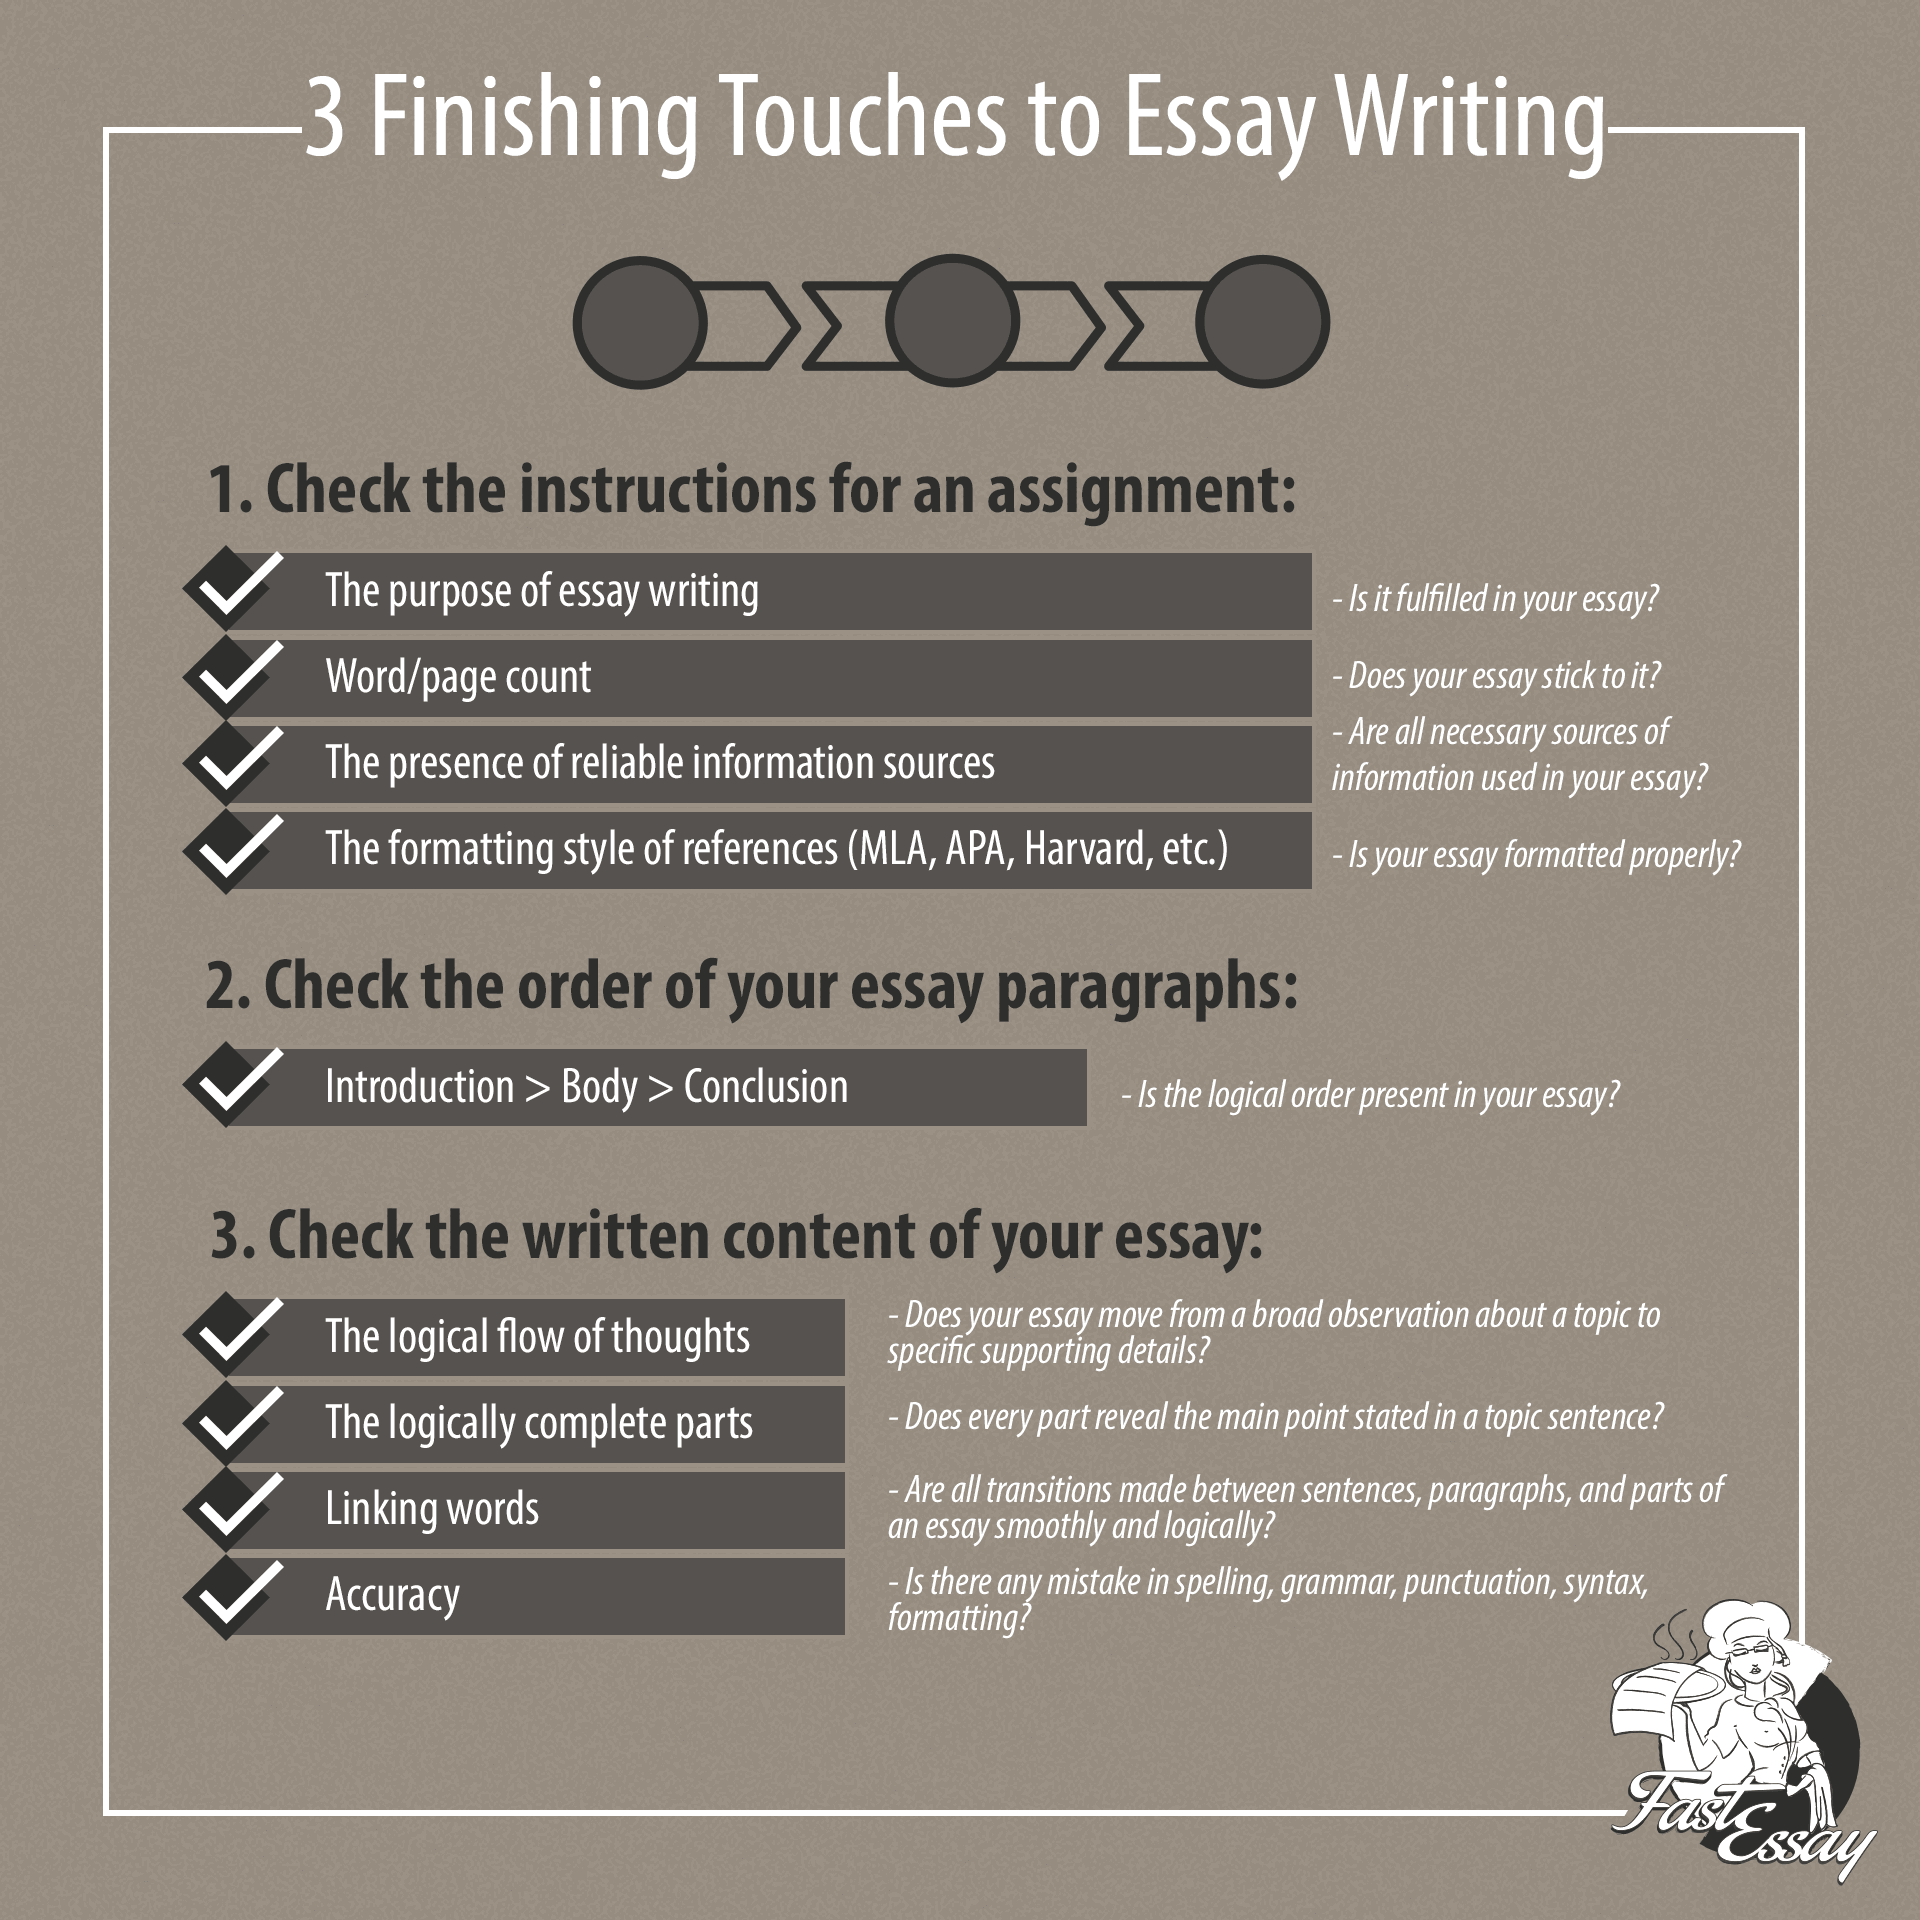 how to write essay last minute